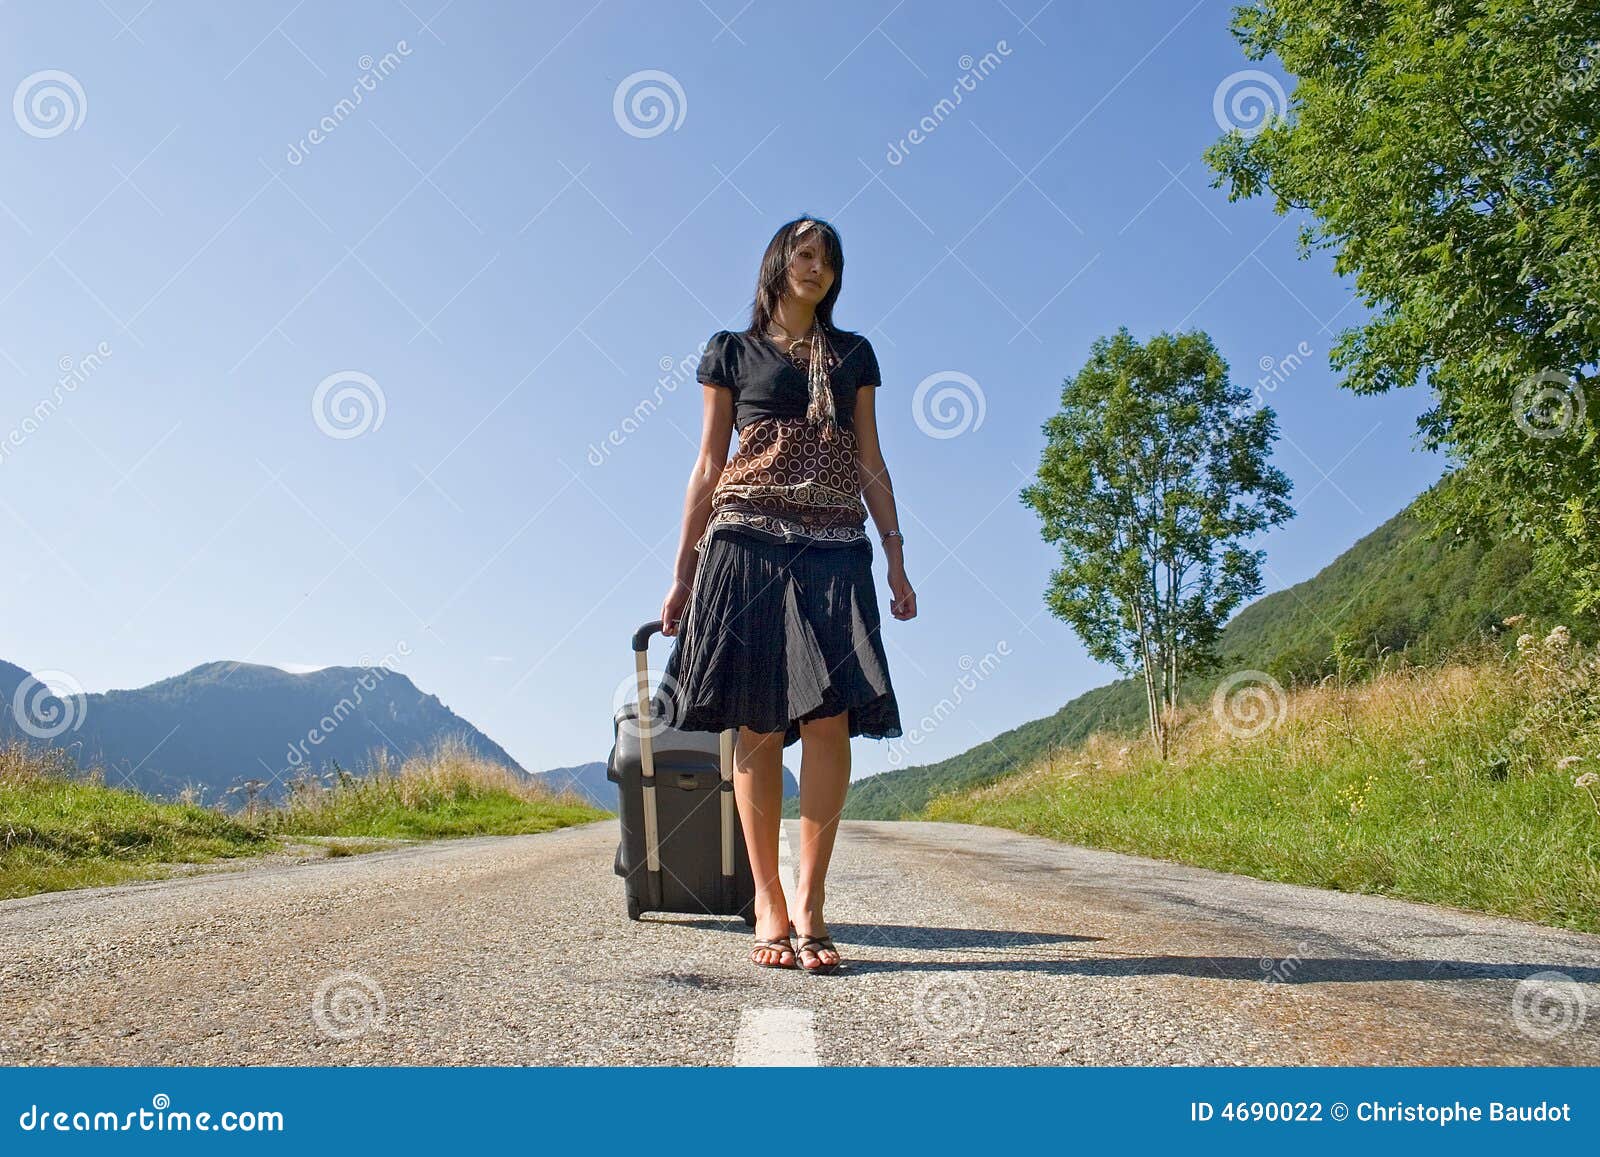 woman leaving on a journey